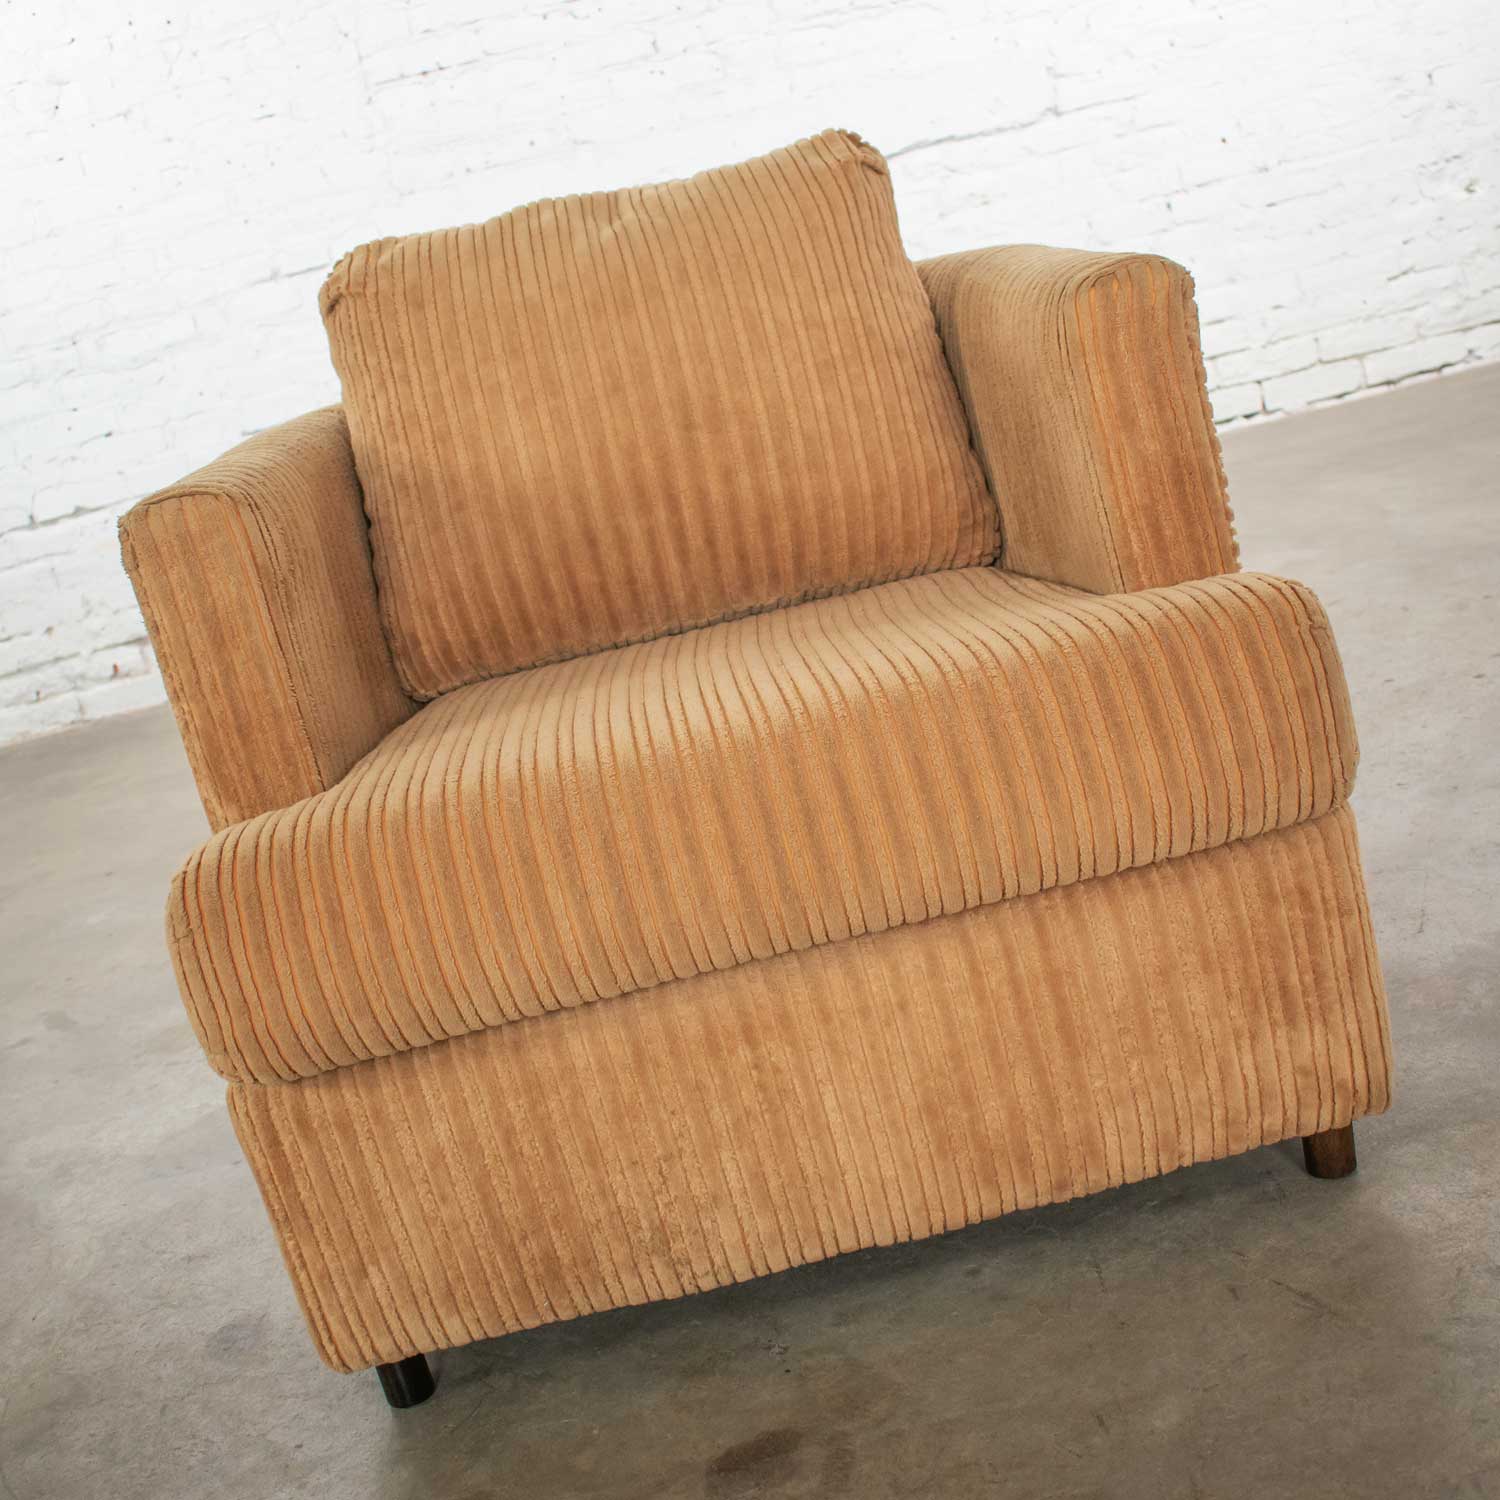 Modern Tub Lounge Chair with Camel Colored Wide Wale Corduroy Style of Harvey Probber